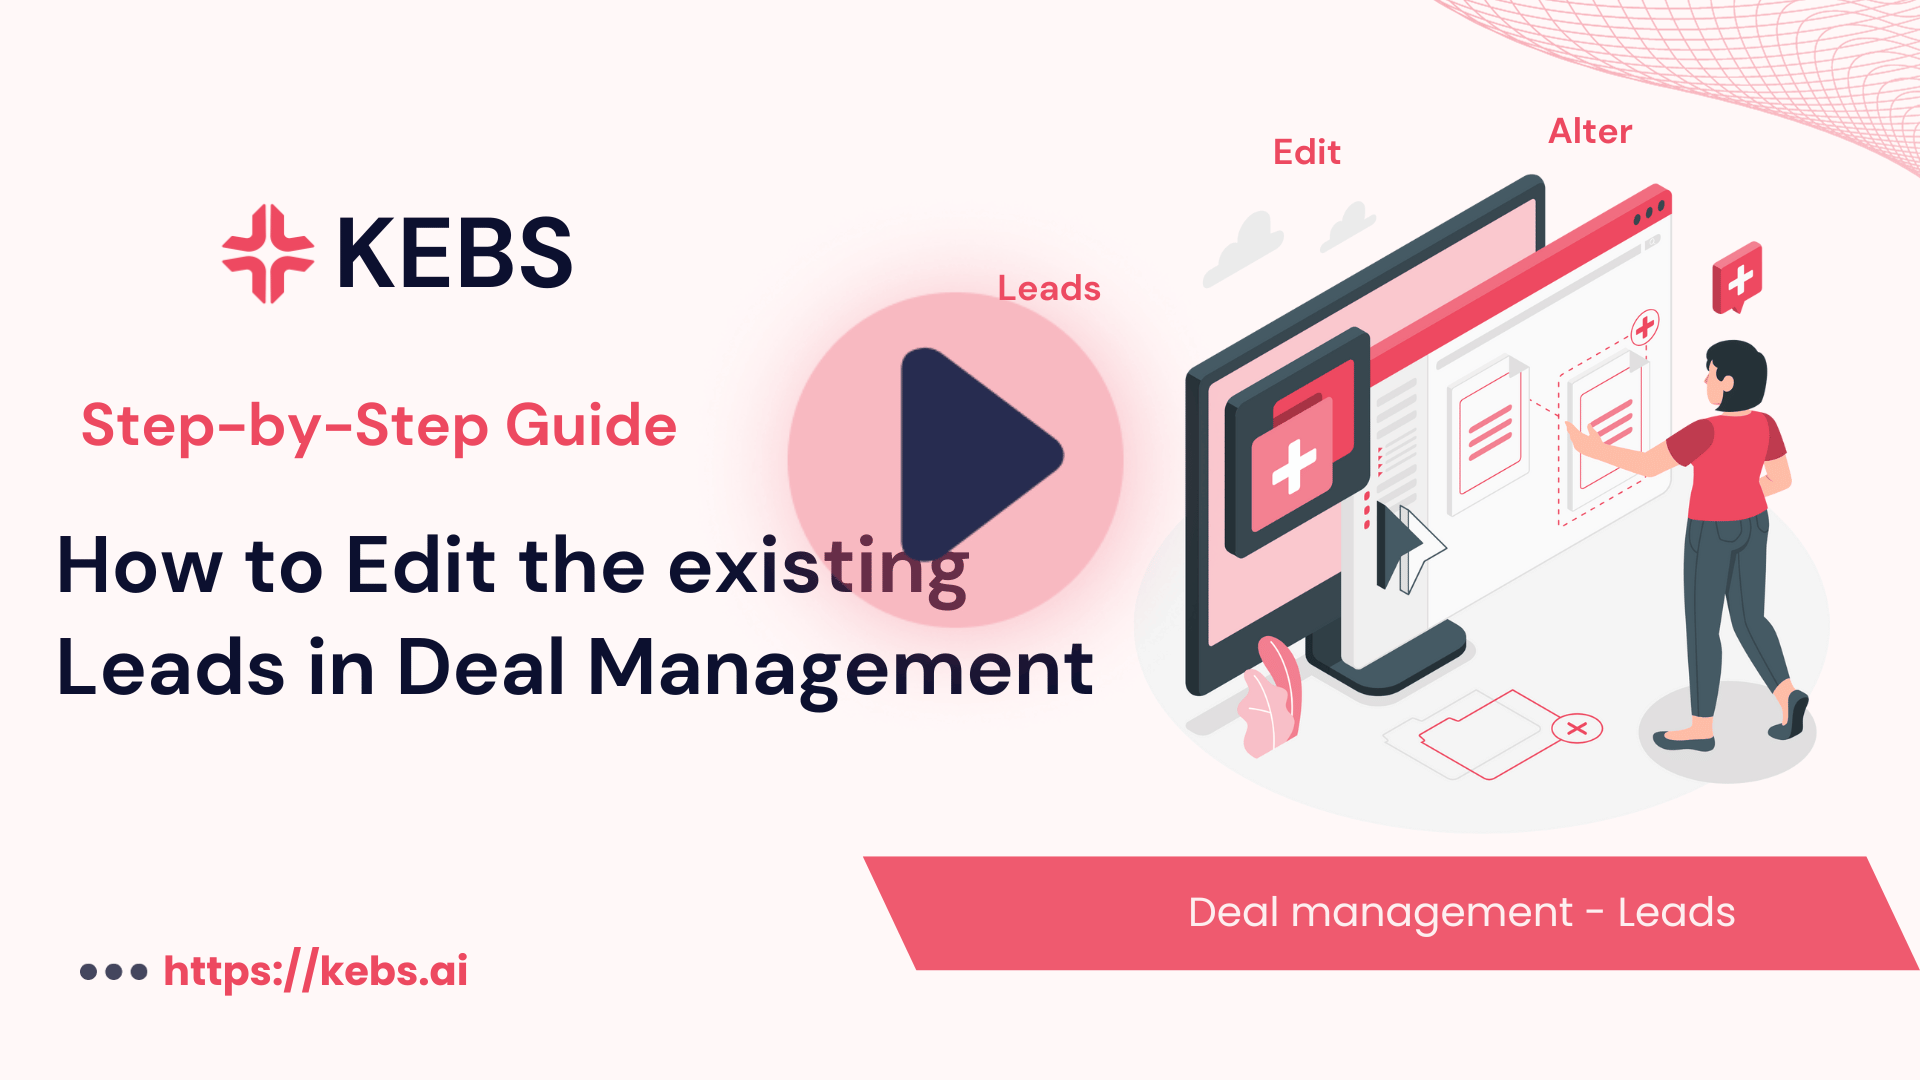 How to Edit the existing Leads in Deal Management